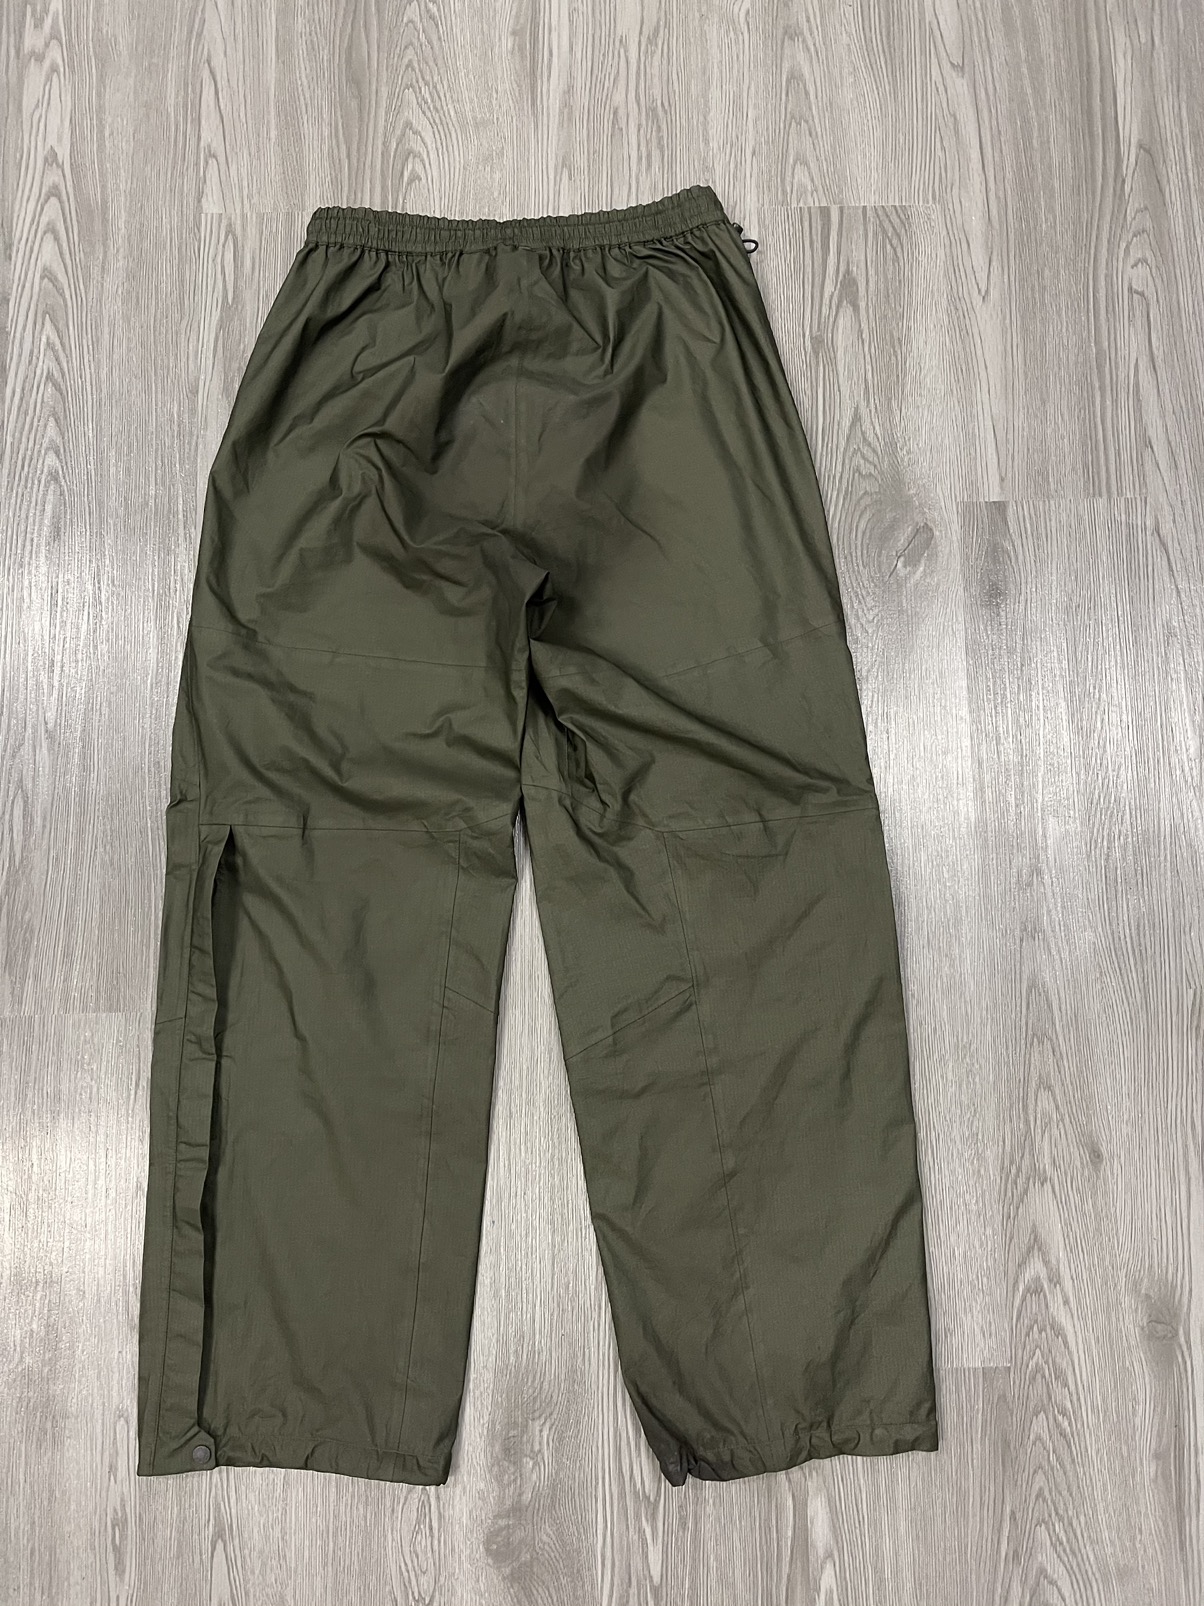 Gorpcore deal🔥The North Face Goretex pant in green - 11